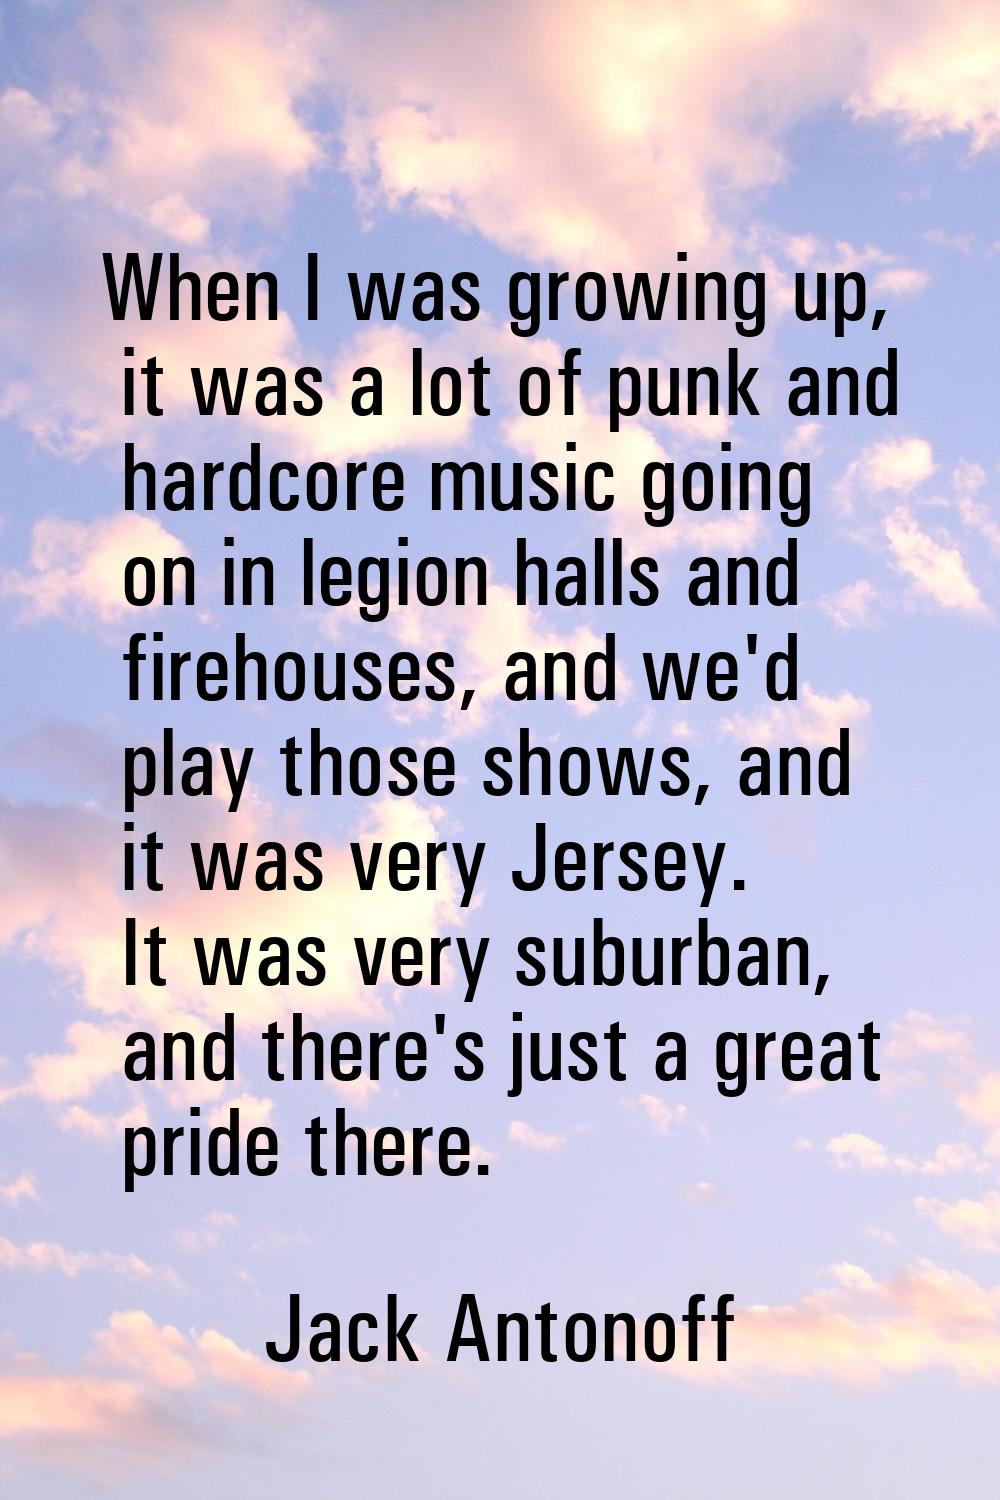 When I was growing up, it was a lot of punk and hardcore music going on in legion halls and firehou